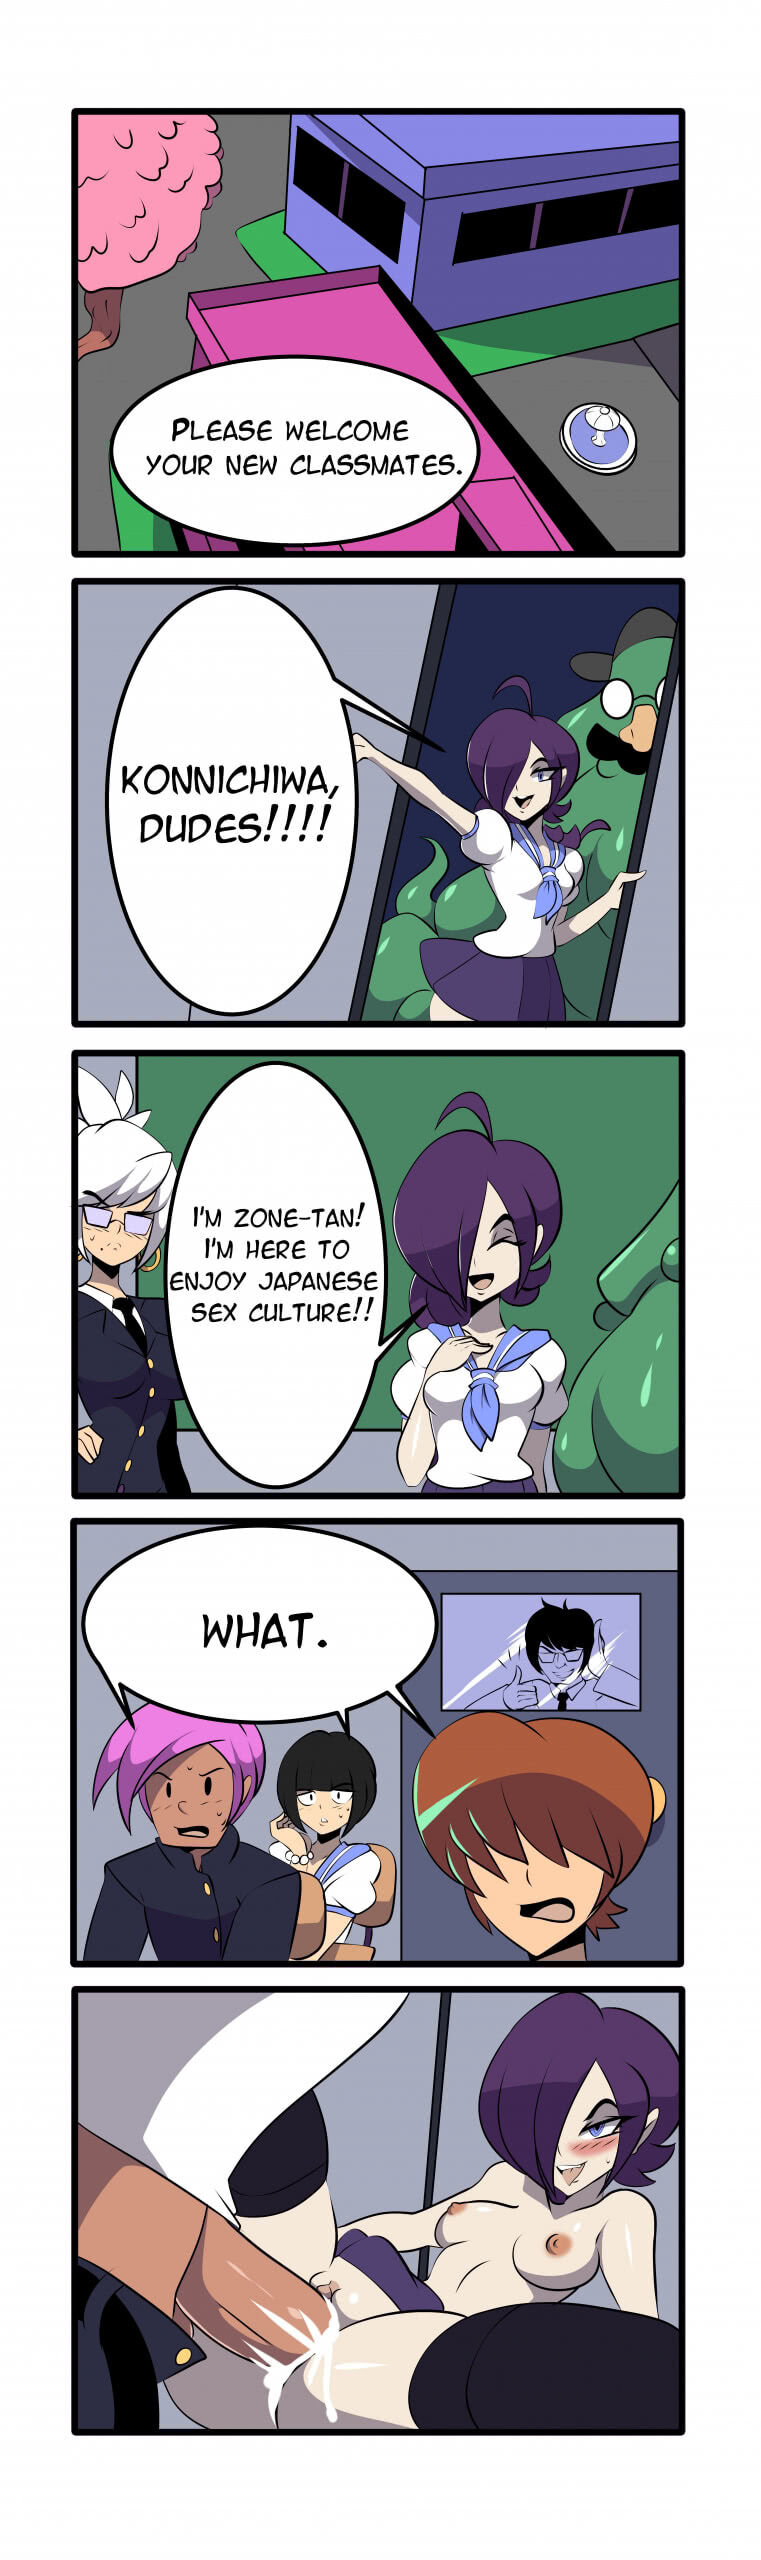 Zone-Tan Adventures - Page 6